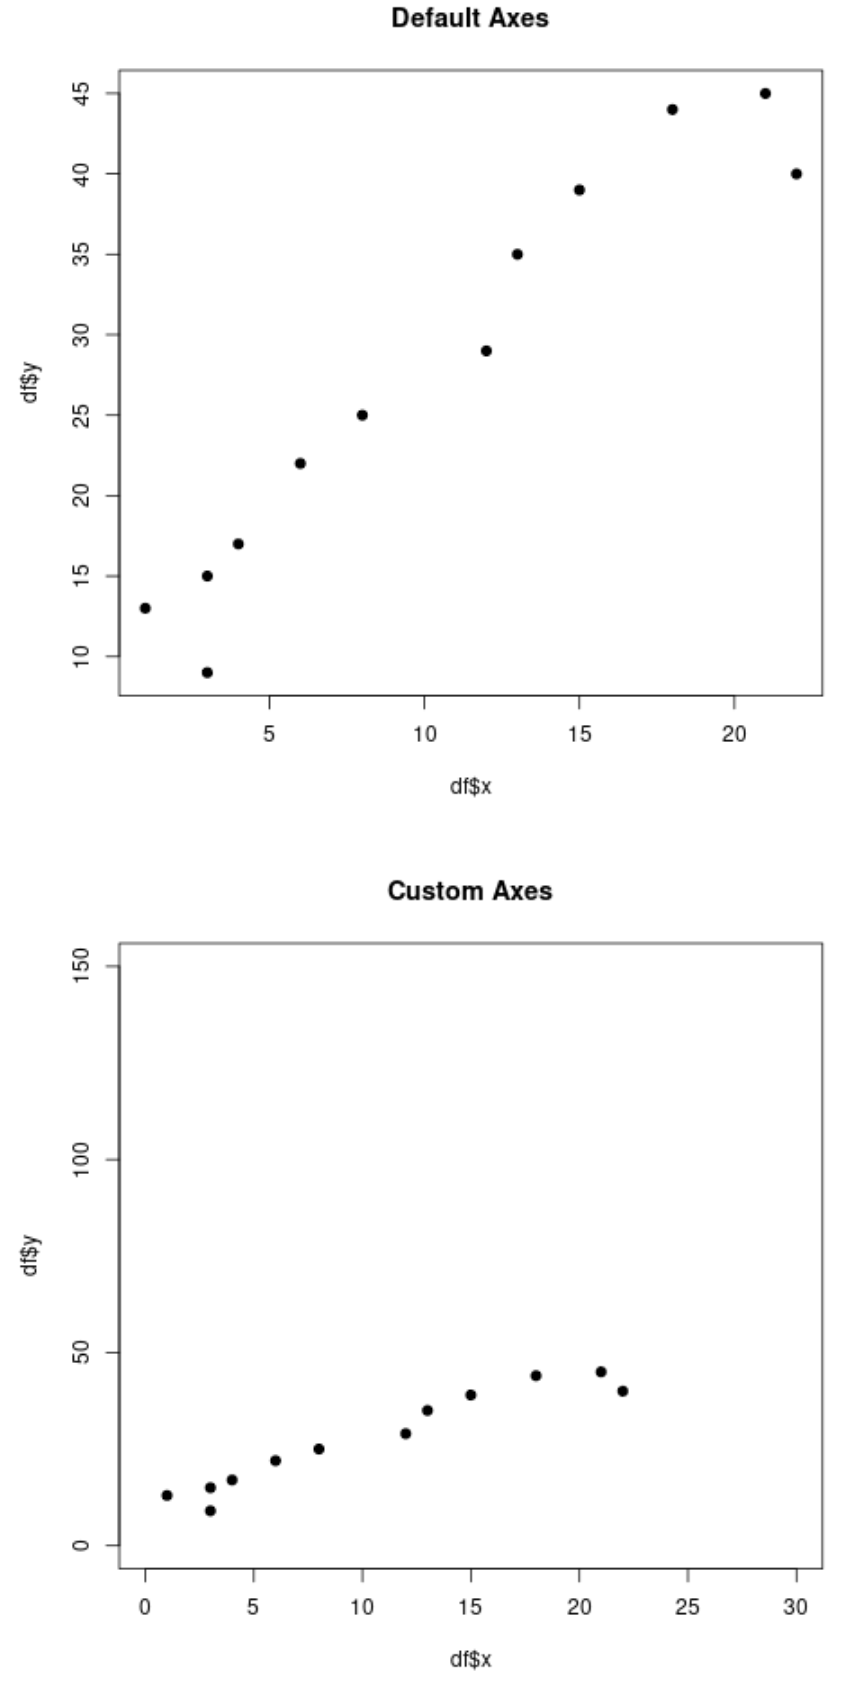 Change axis scales in R plots